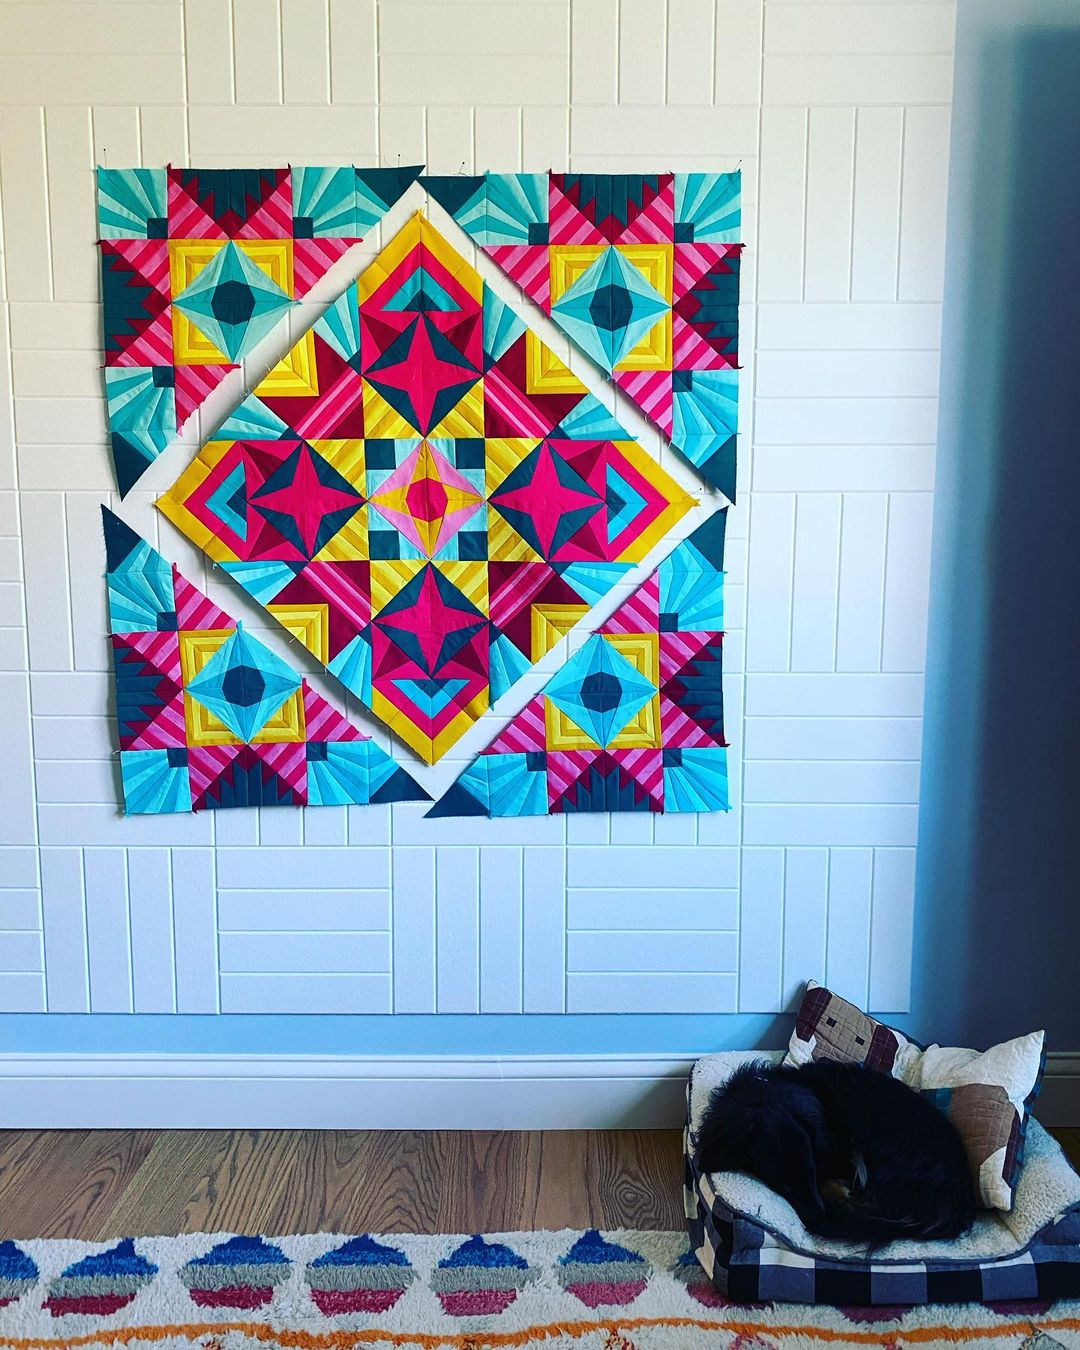 Sparkler quilt patterns: The finished quilt in the main colorway